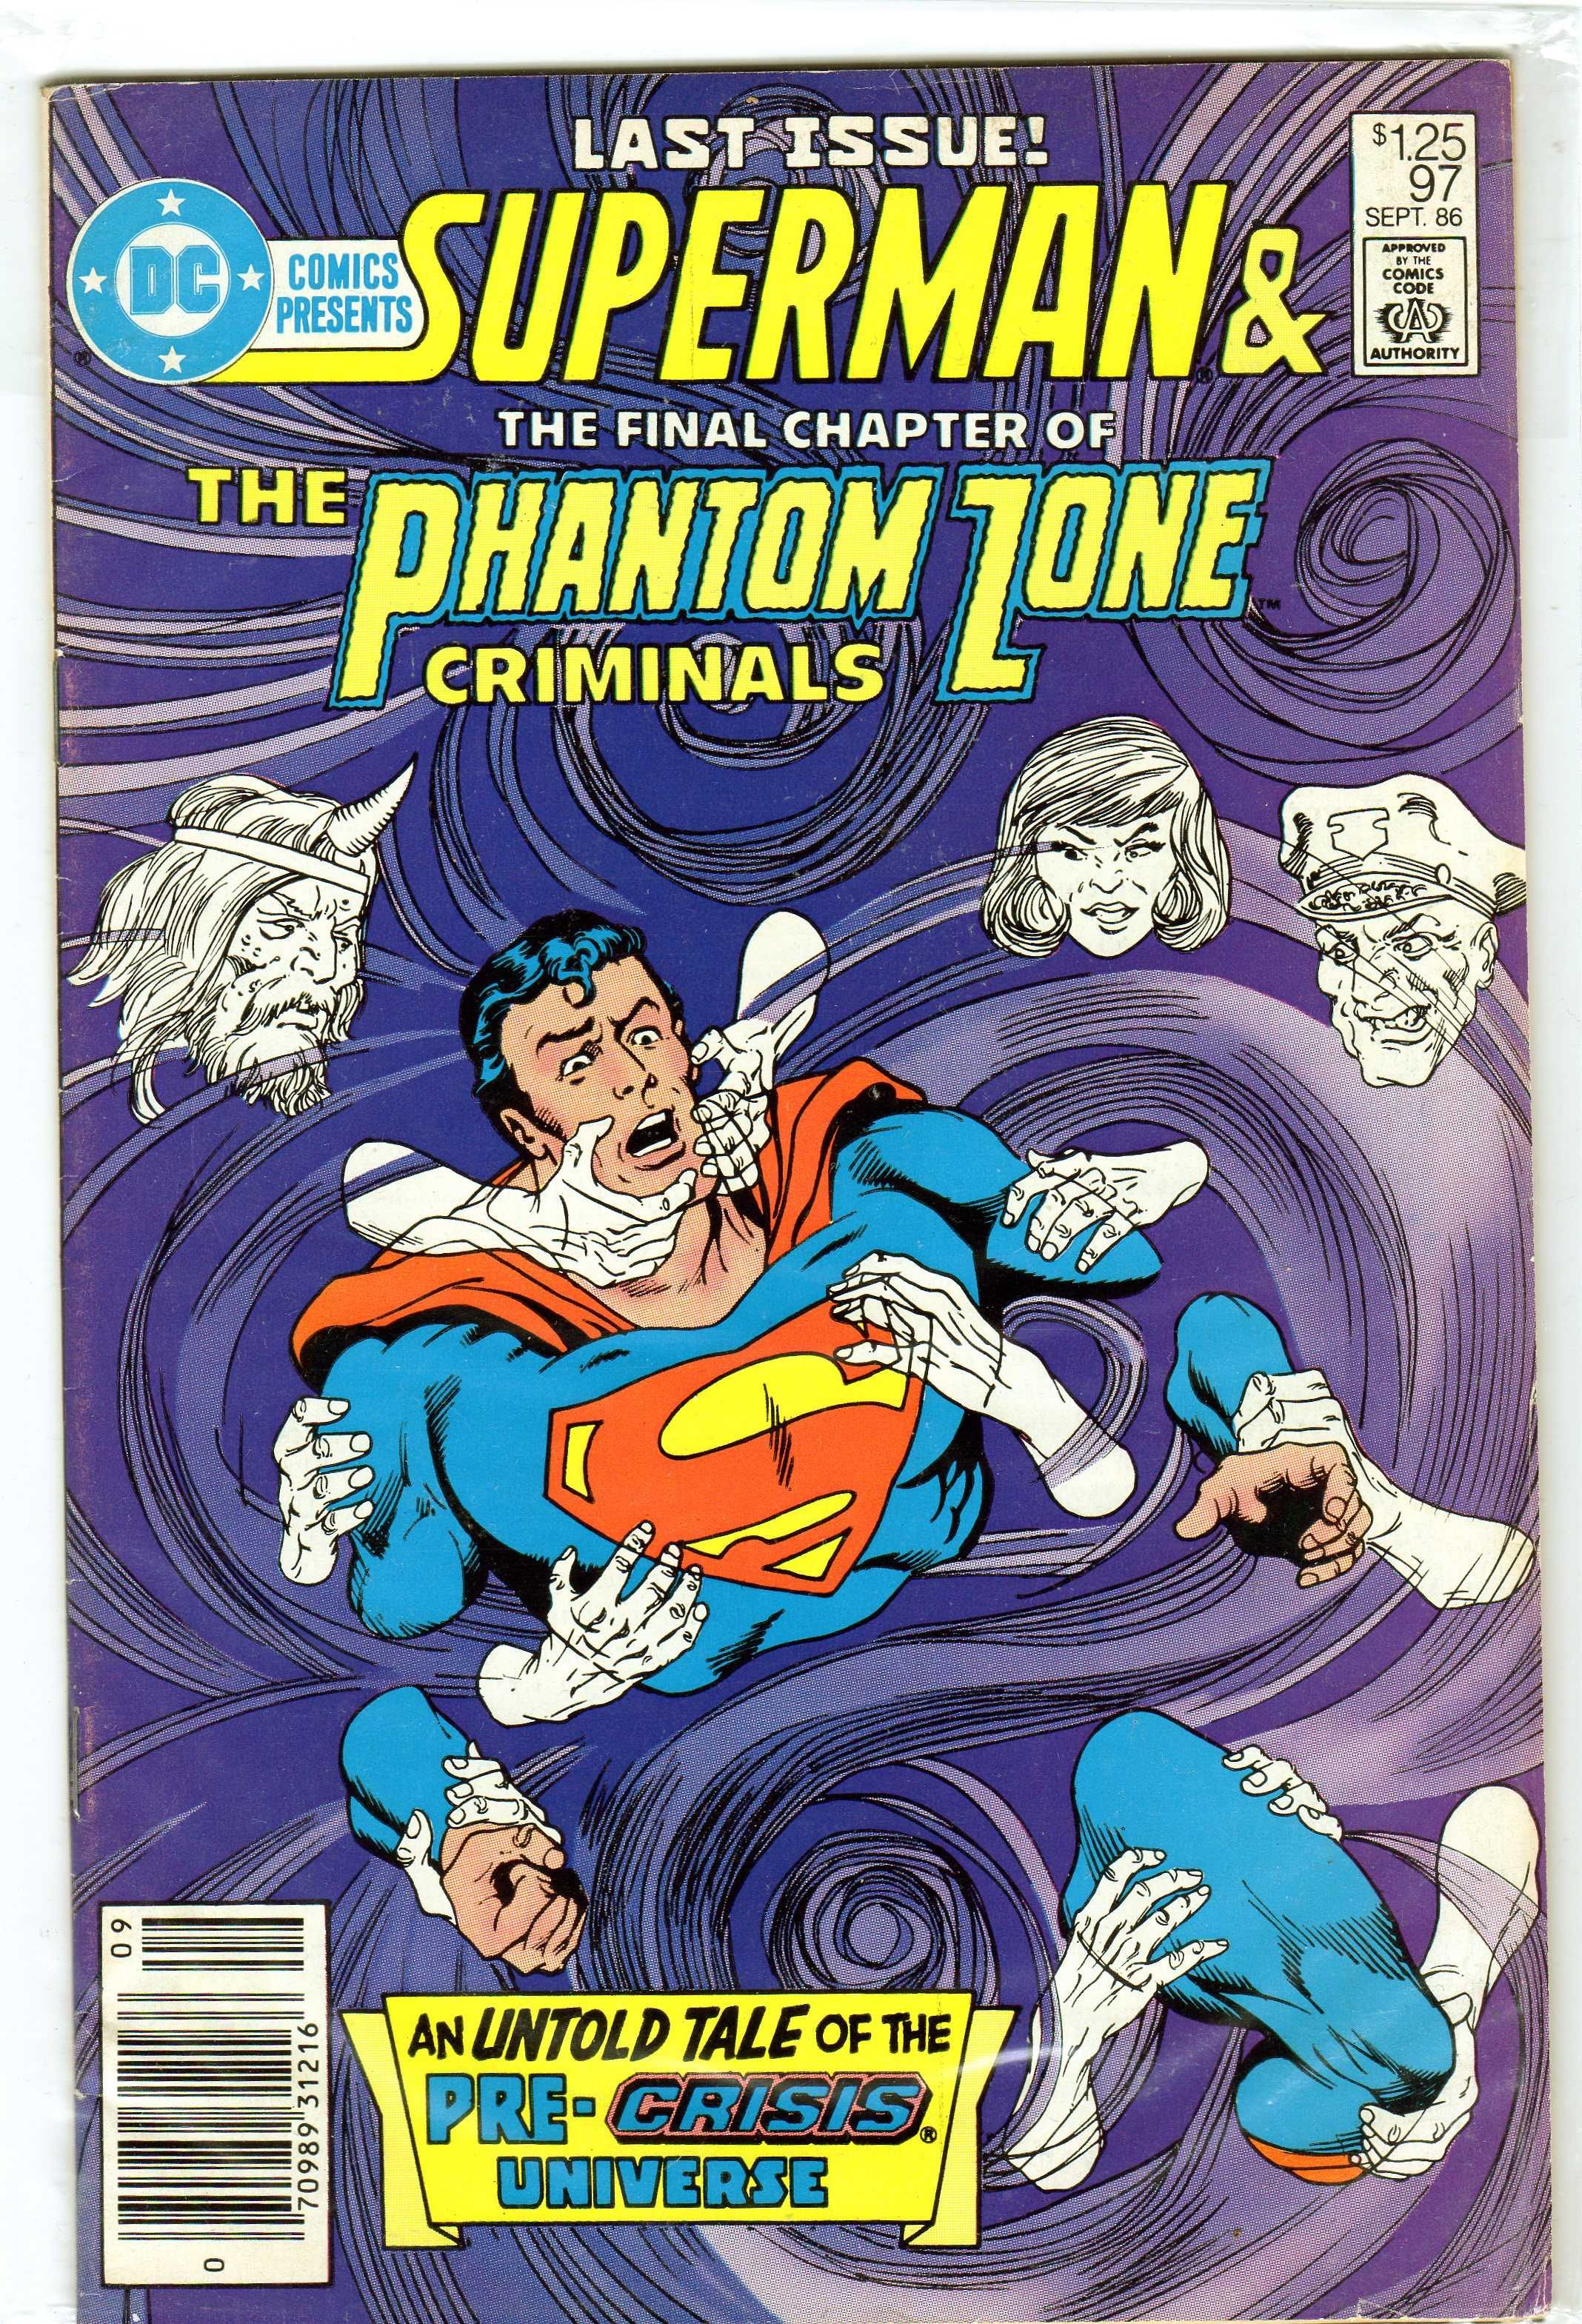 DC Comics Presents #97 Superman and the final chapter of the Phantom